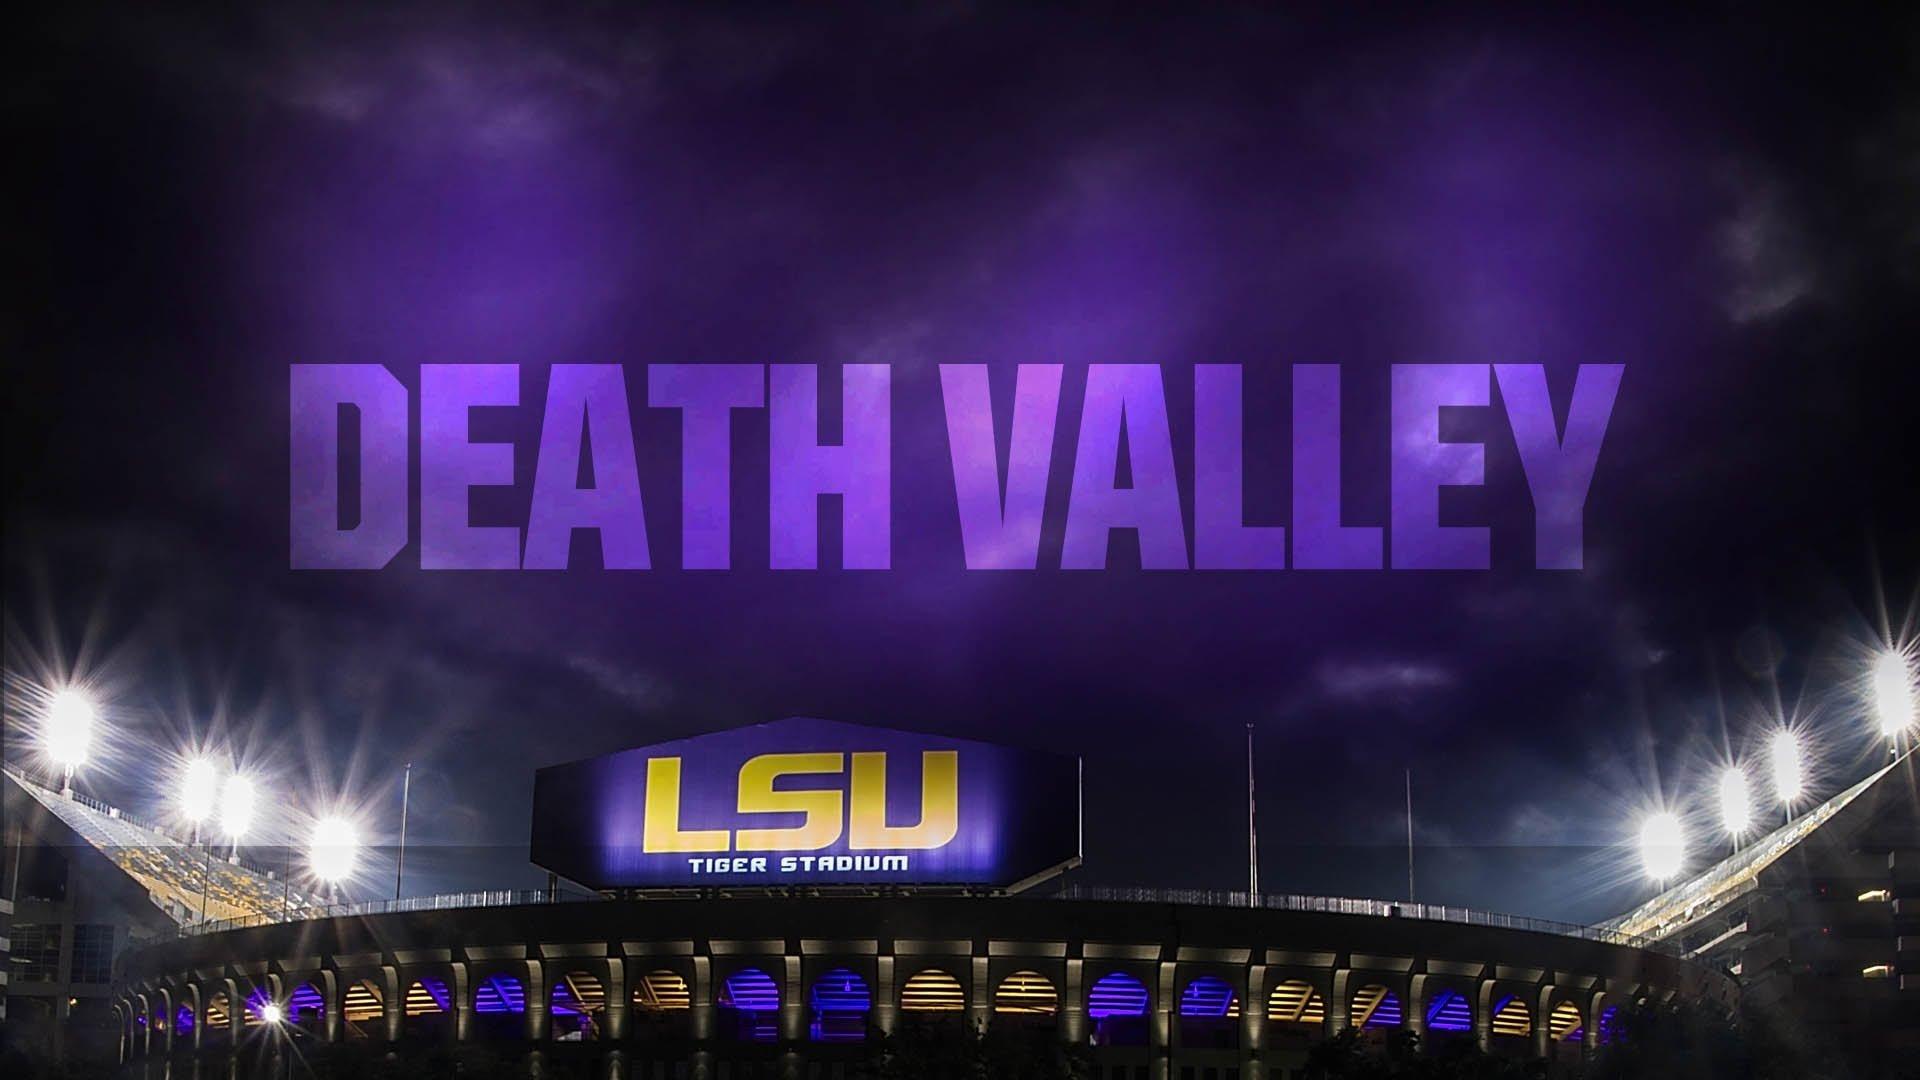 lsu, Tigers, College, Football Wallpaper HD / Desktop and Mobile Background